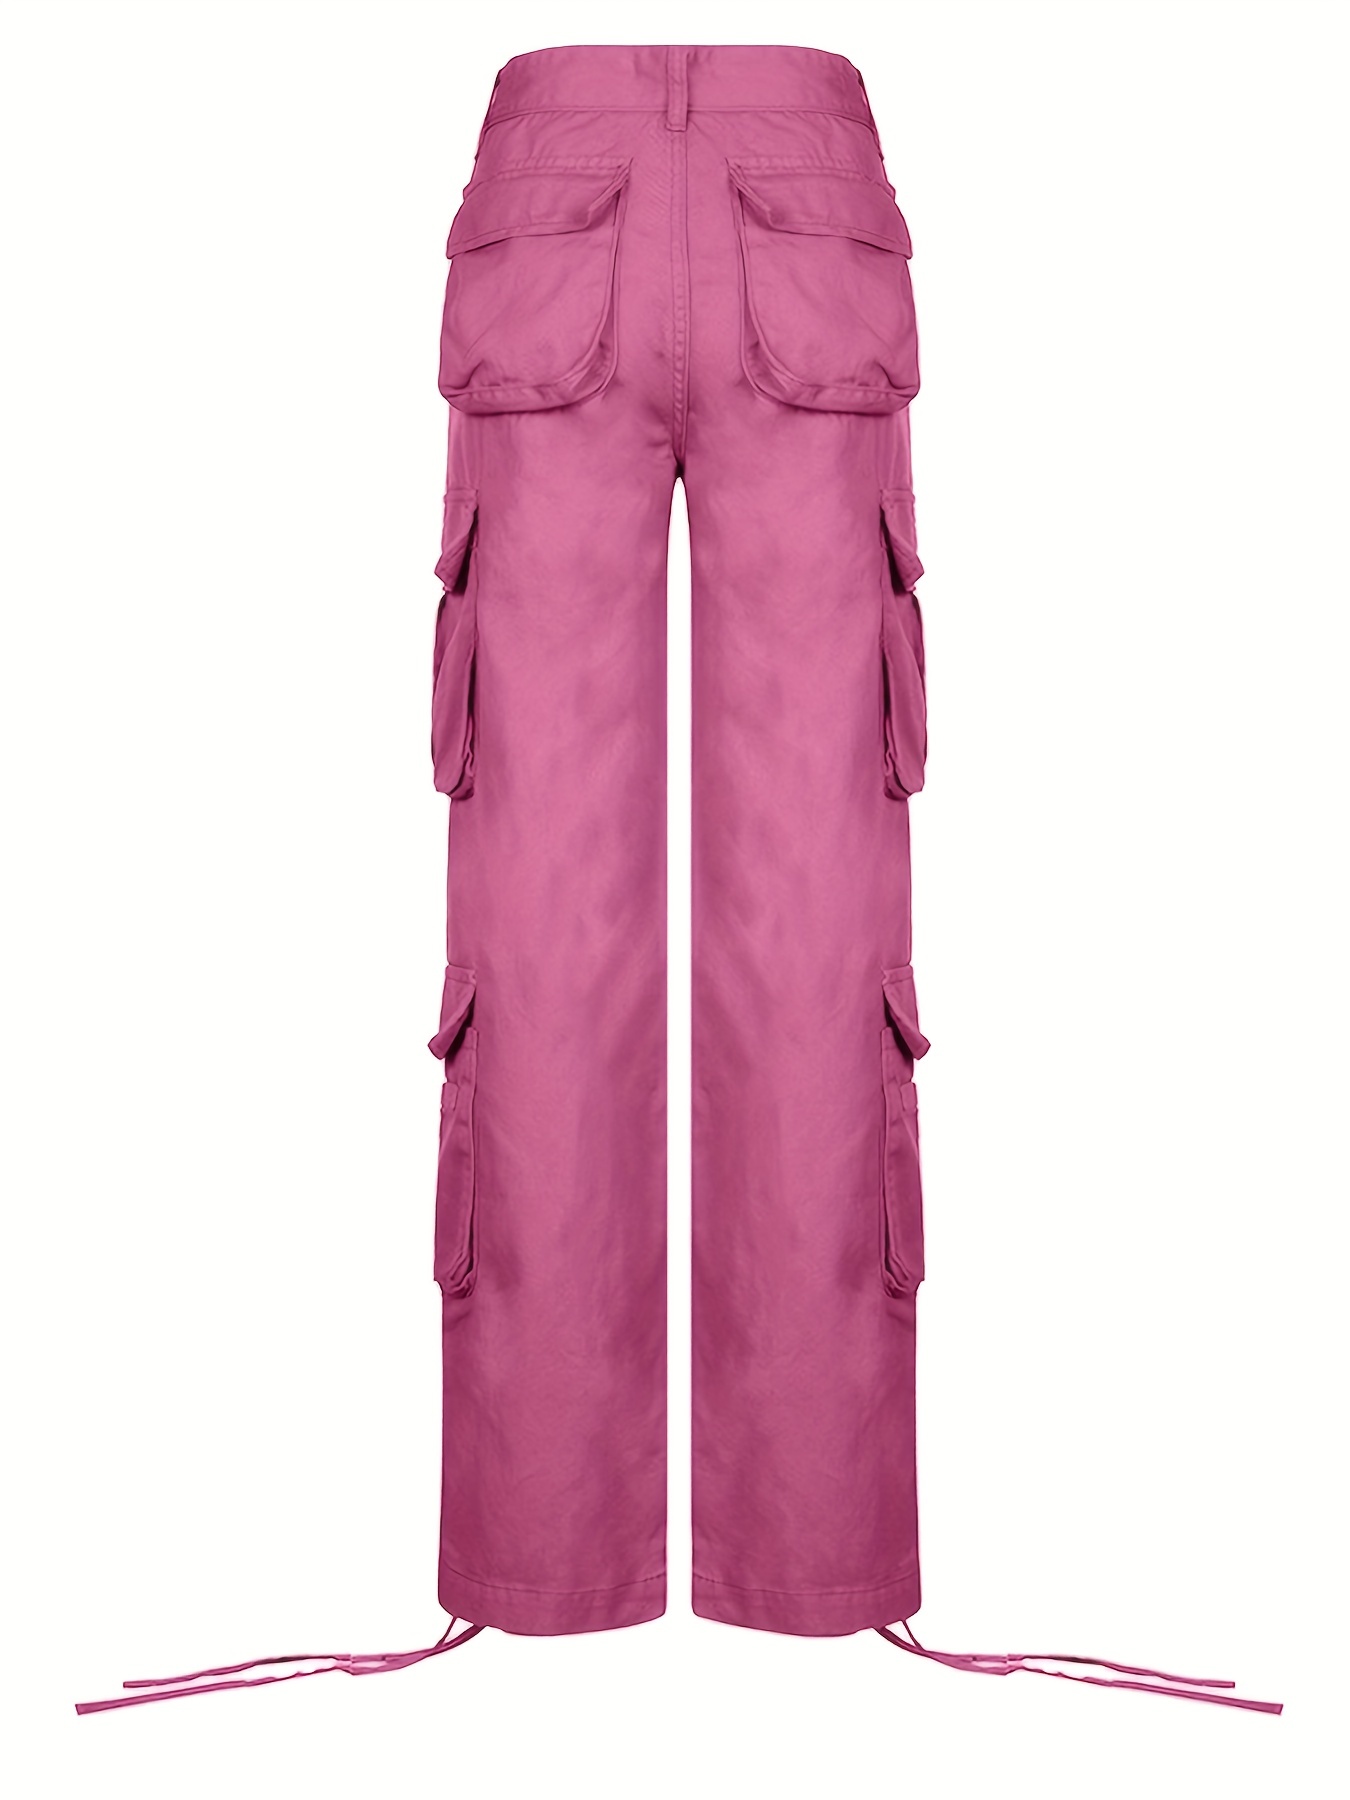 Stylish & Hot six pocket pants for girls at Affordable Prices 